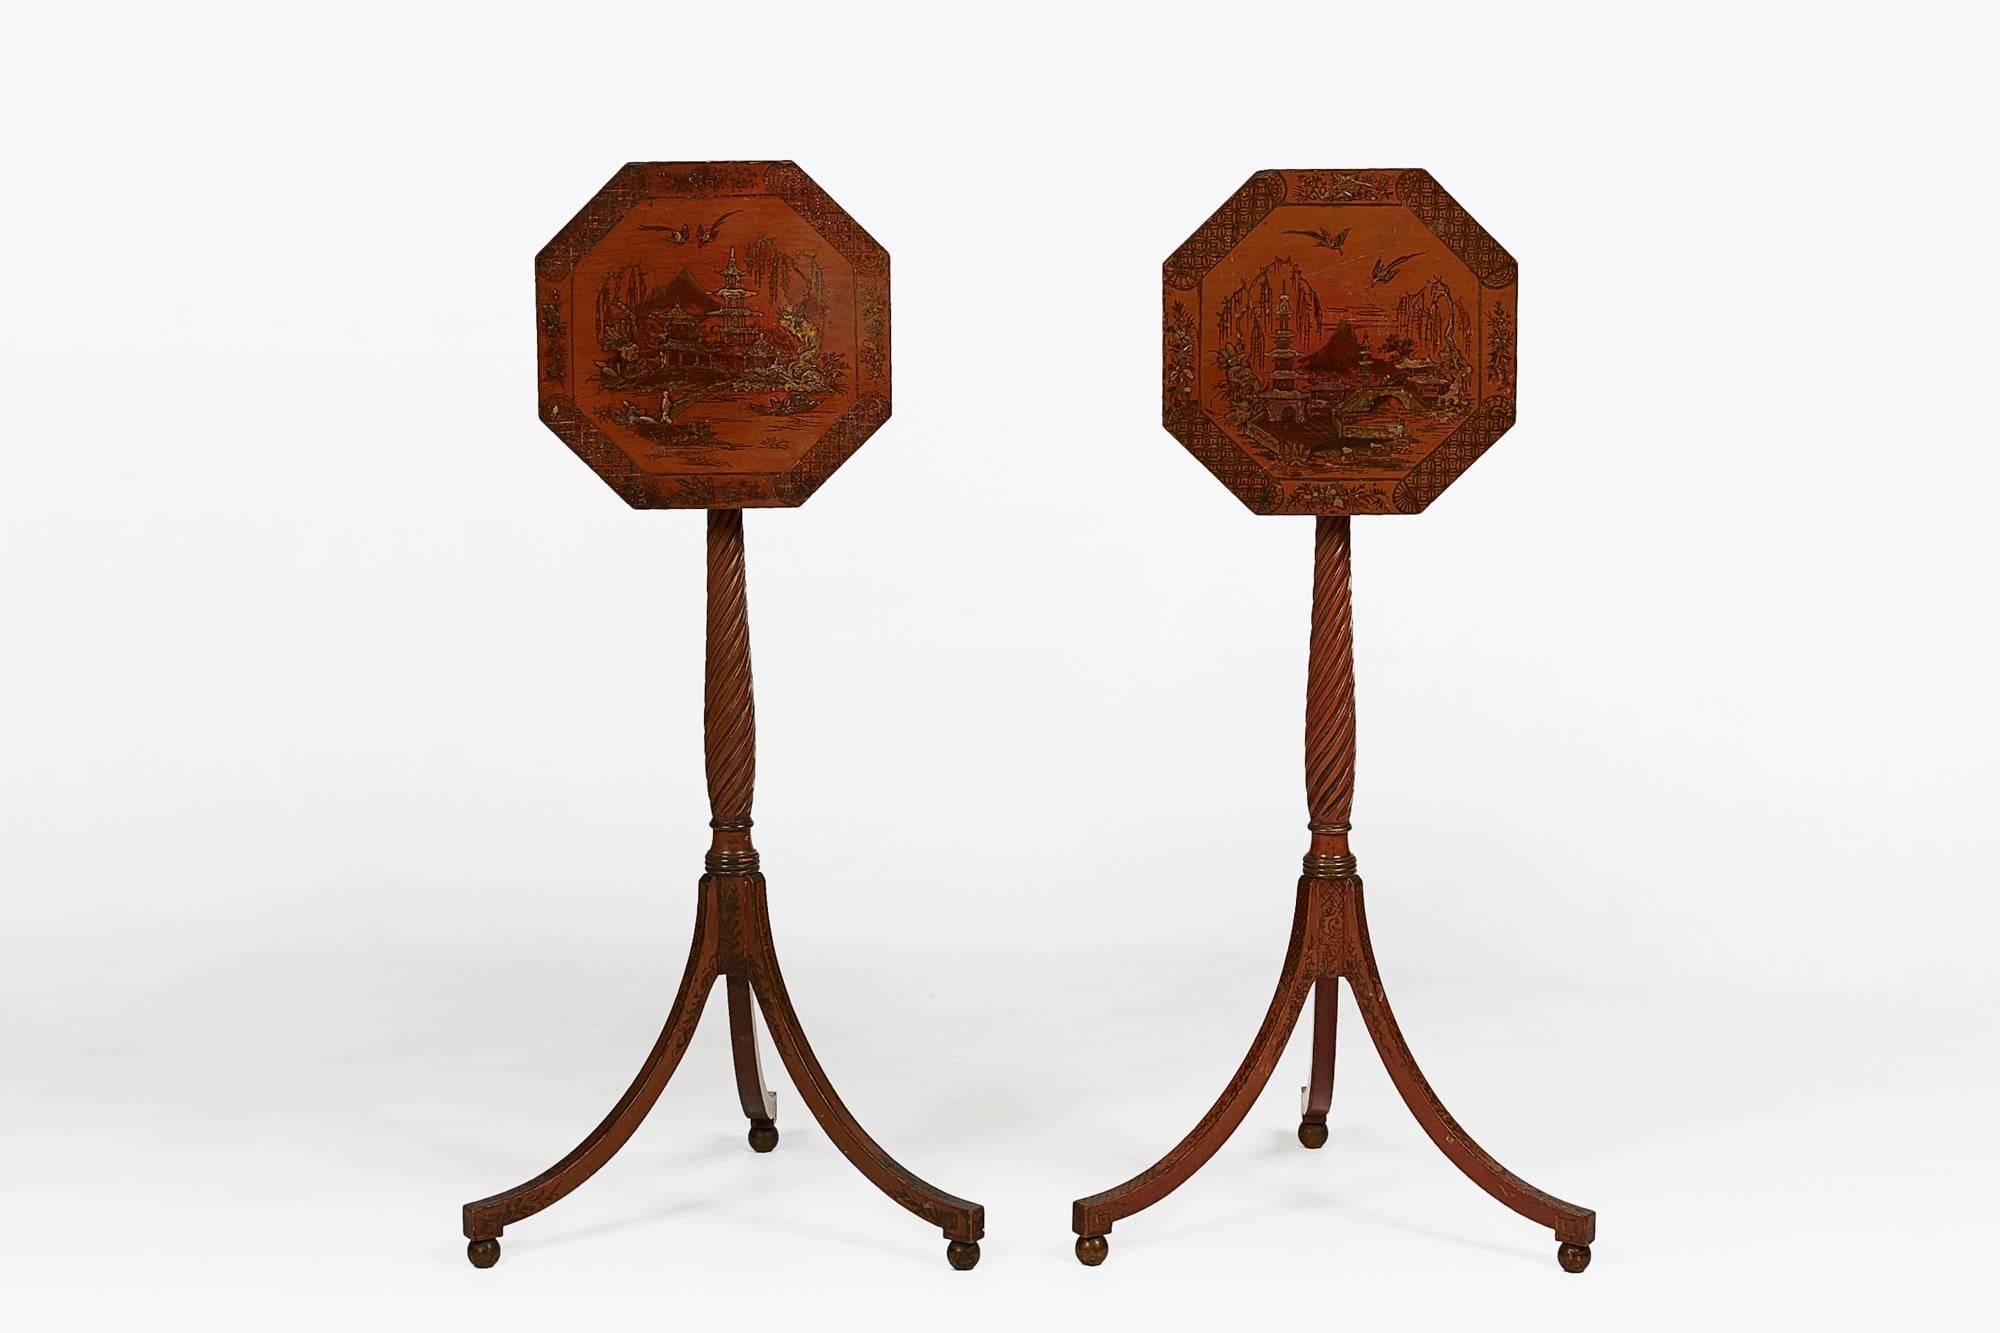 Early 19th century Regency pair of chinoiserie lacquered end tables with tilt-tops.